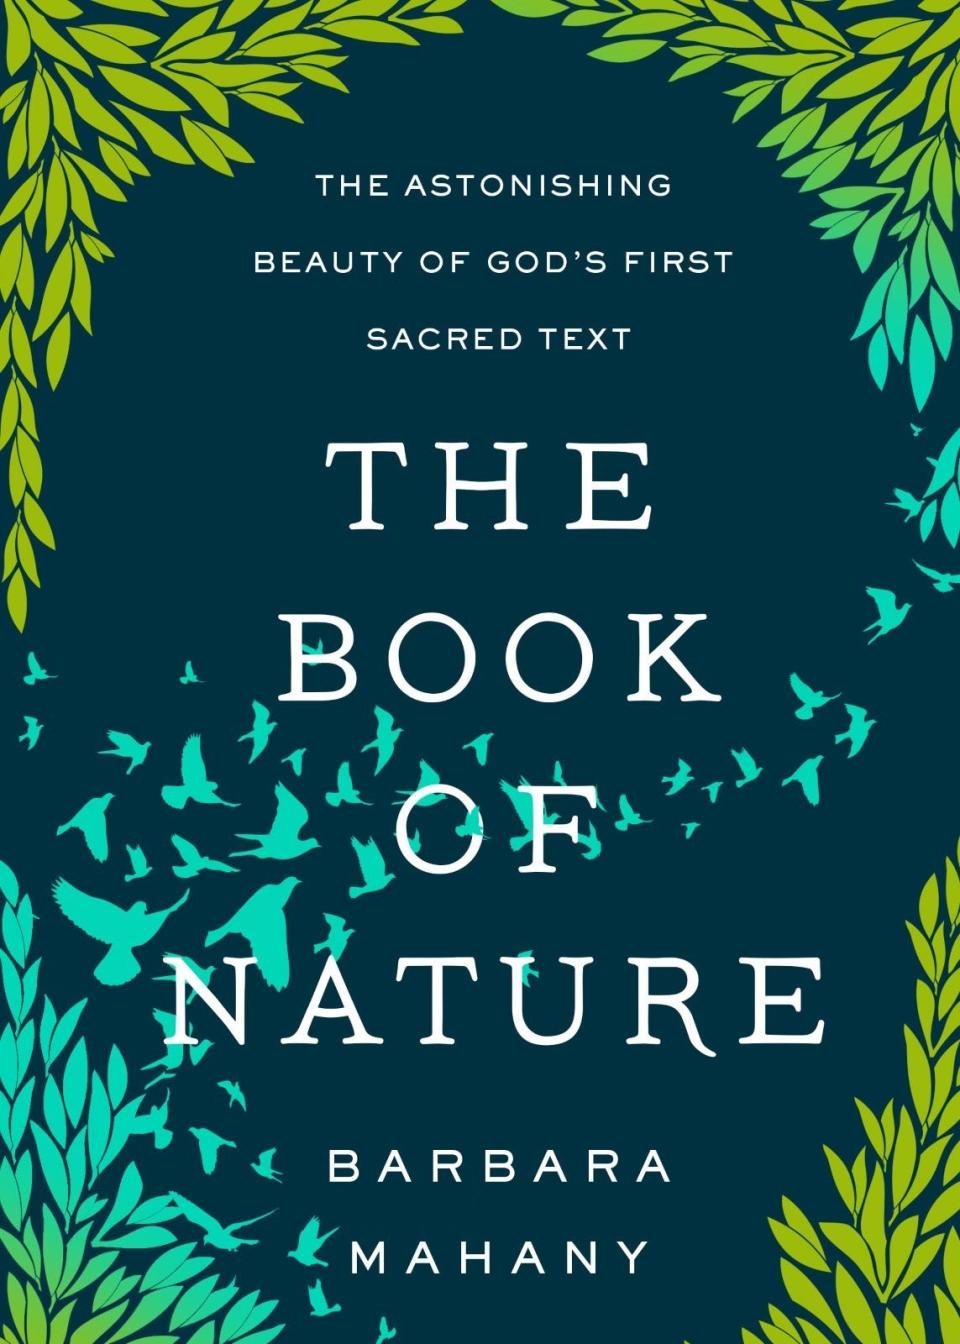 The Book of Nature: The Astonishing Beauty of God's First Sacred Text. By Barbara Mahany.